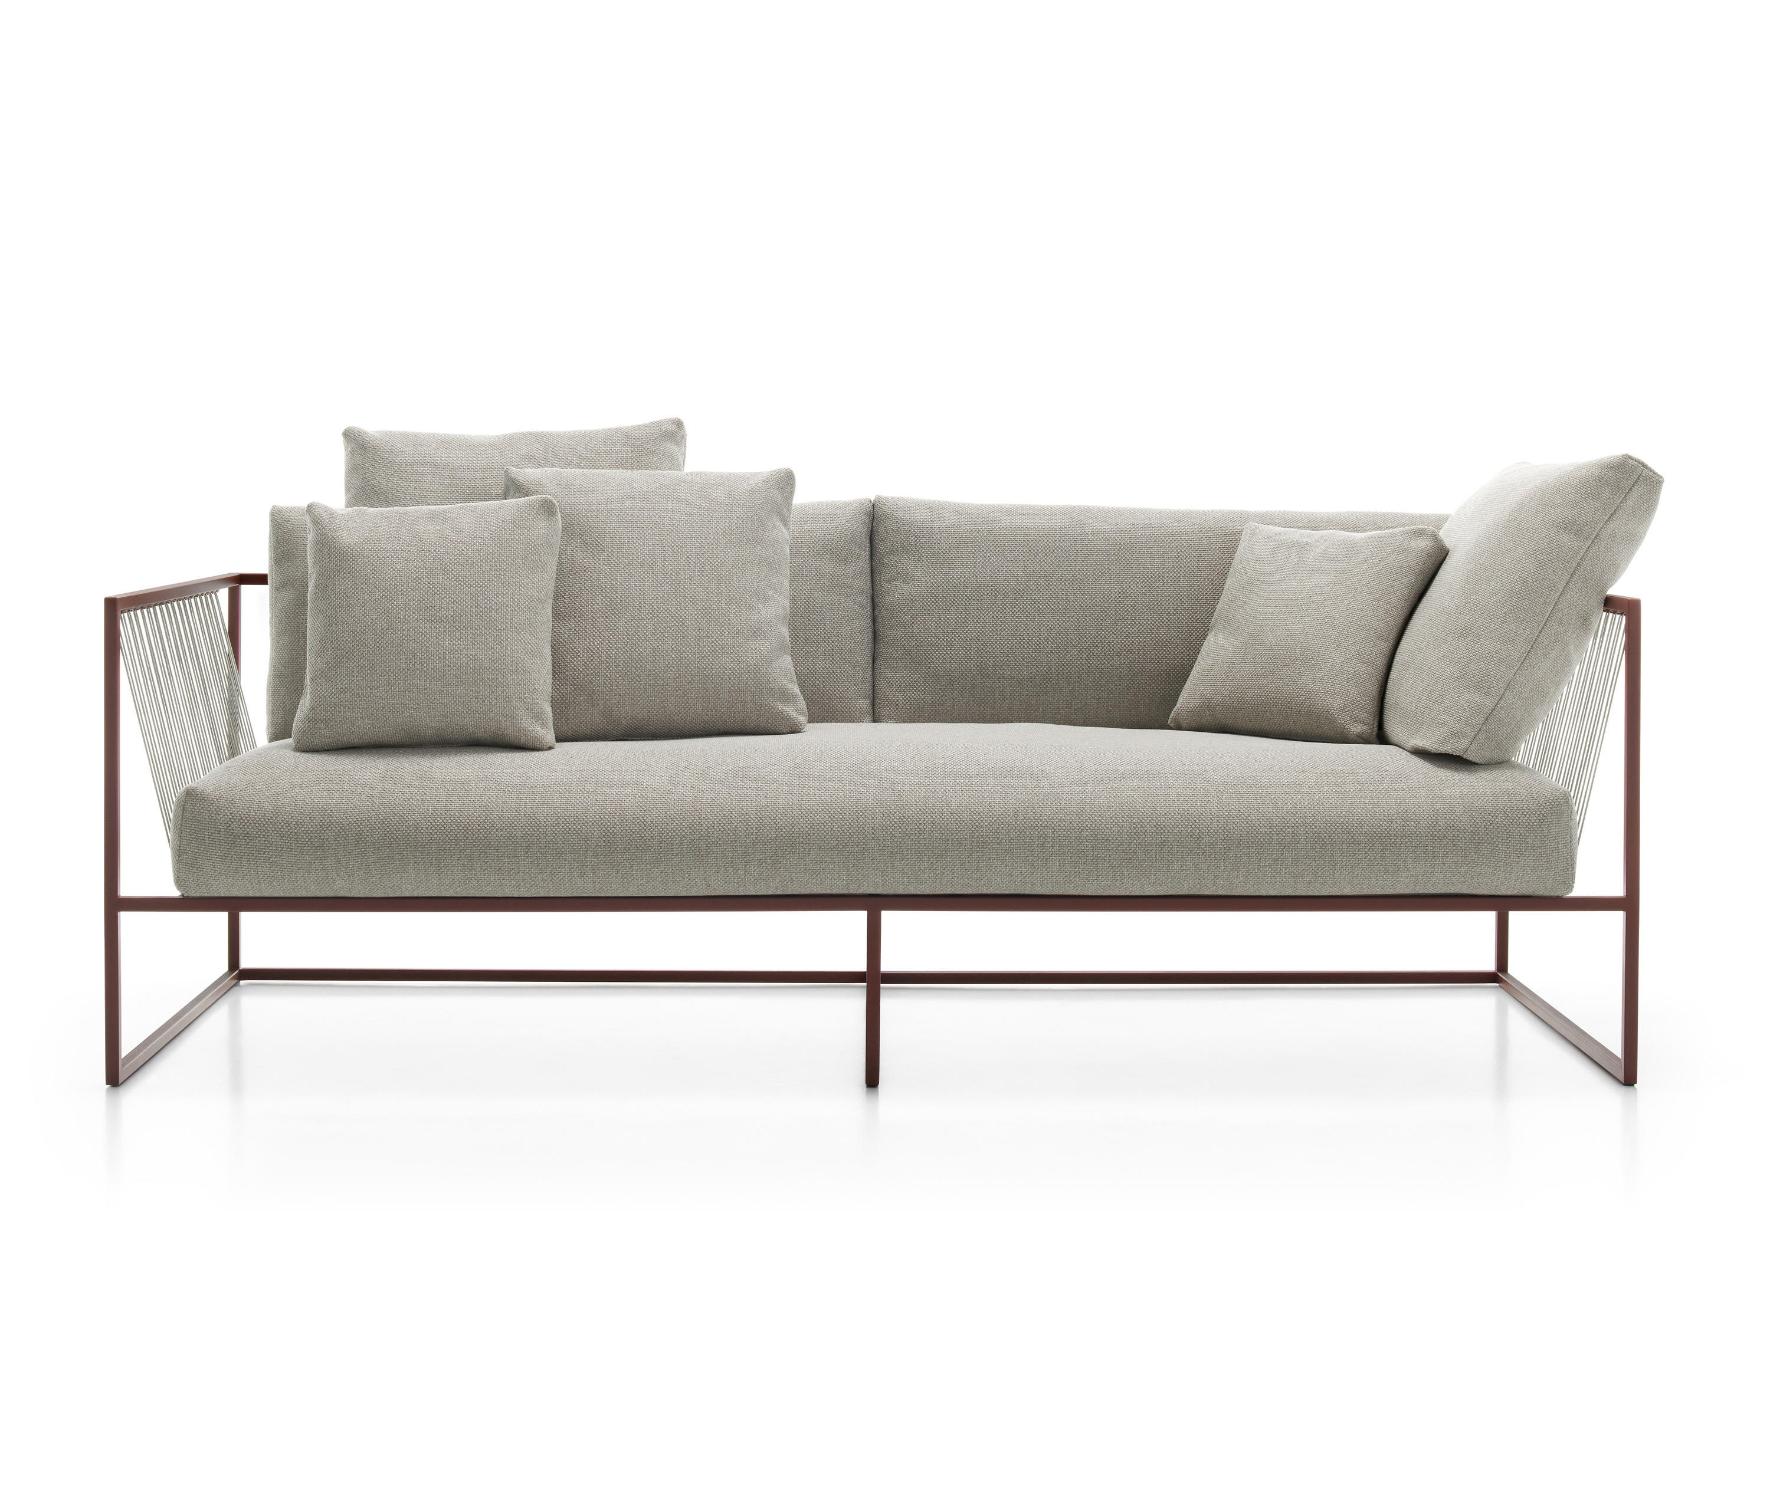 Arpa Light Outdoor Sectional Sofa